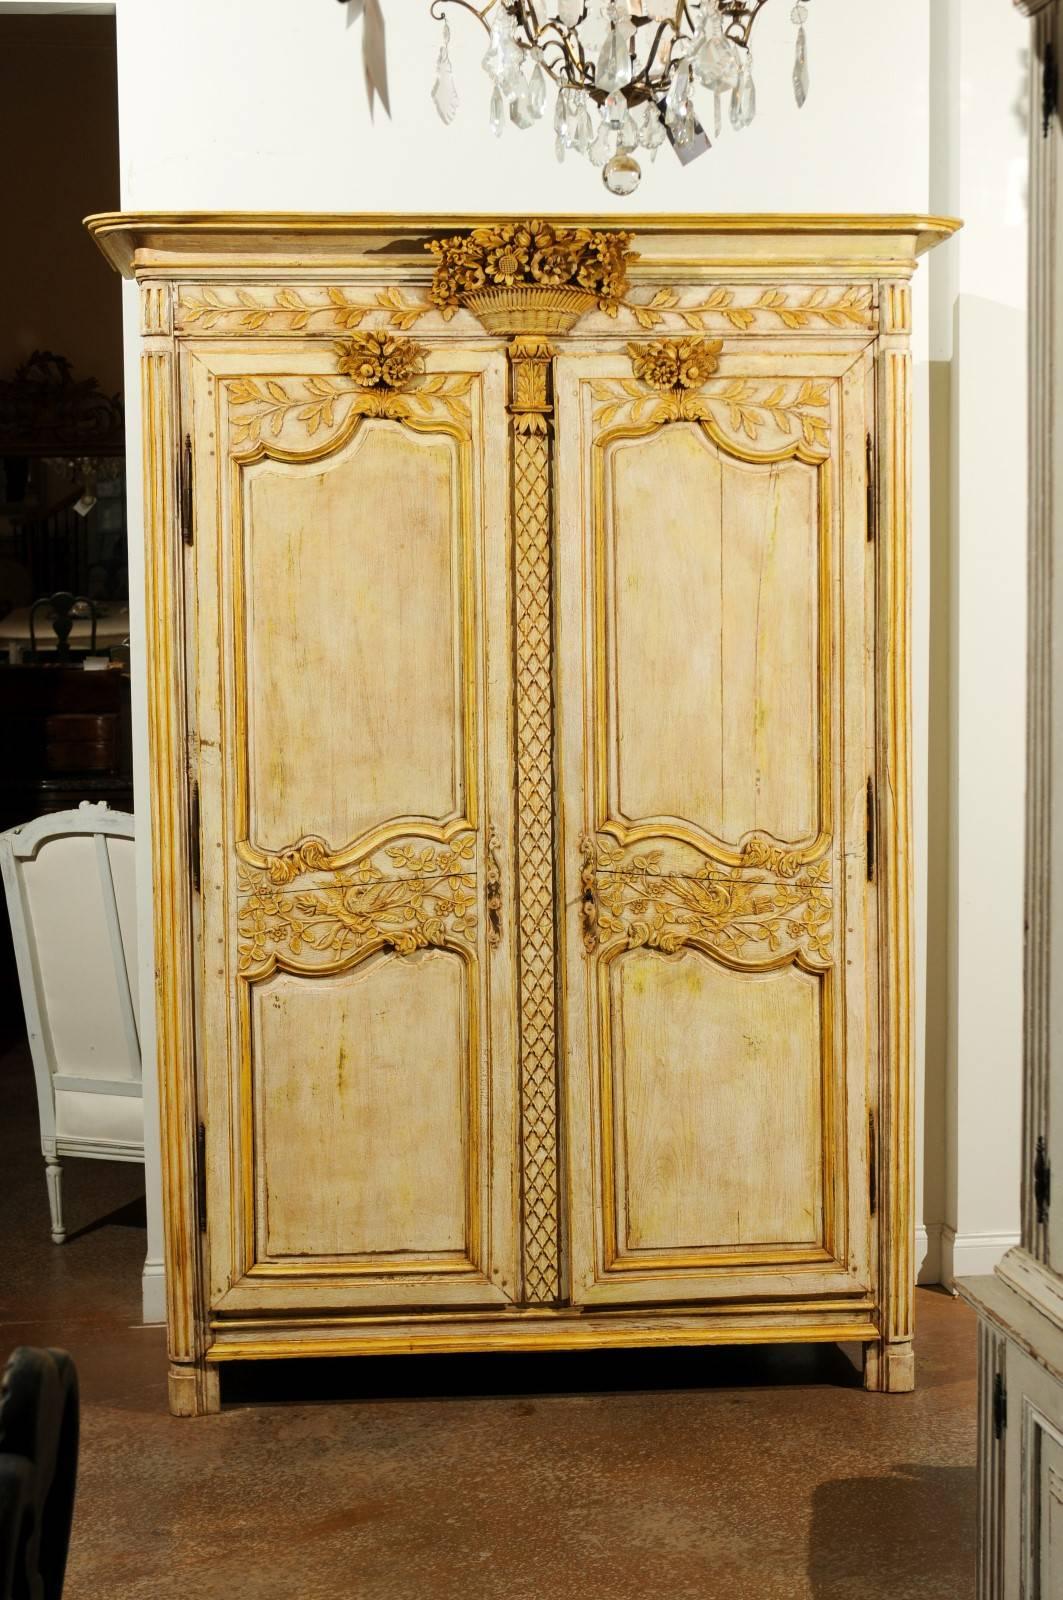 A French Transition period painted marriage armoire with floral carved cornice and doors from the mid-18th century. Delicately painted with goldenrod accents, this French armoire features an exquisite bouquet of flowers carving in the cornice,